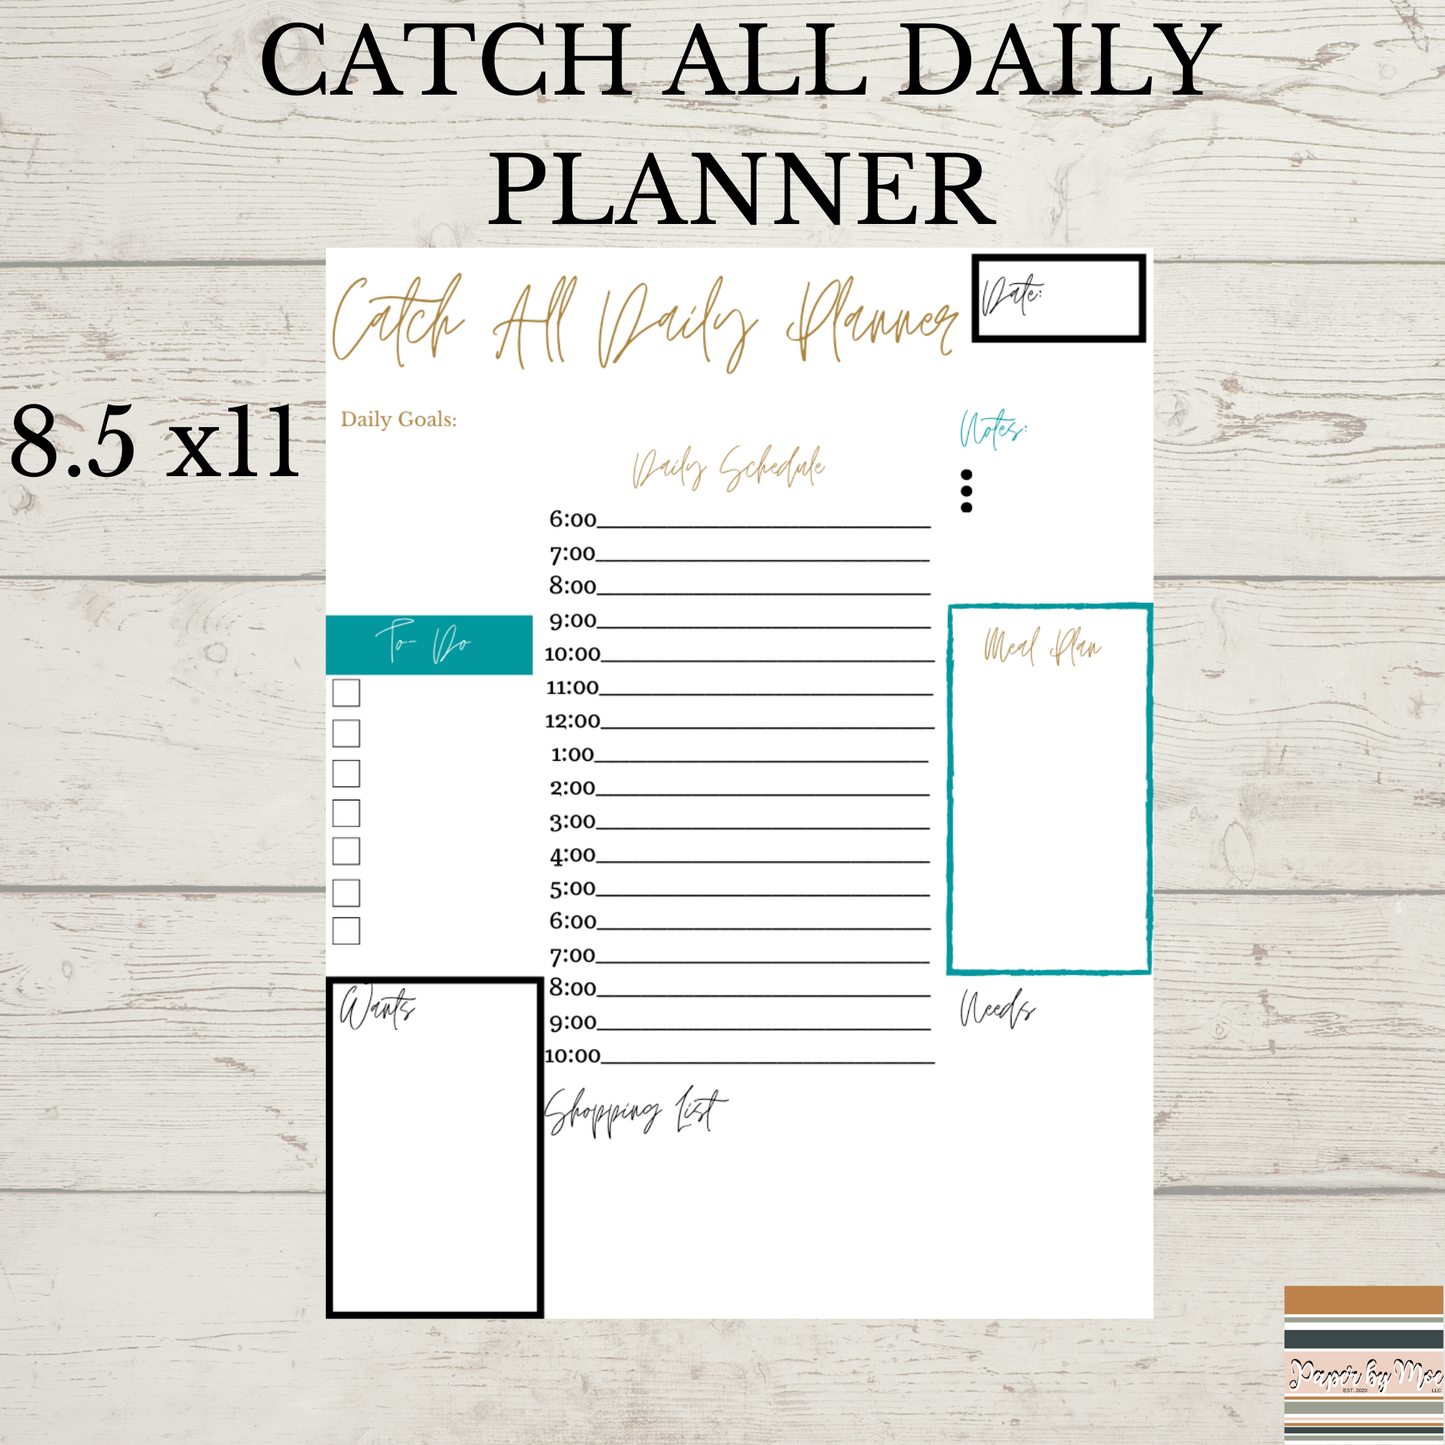 Catch All Daily Planner